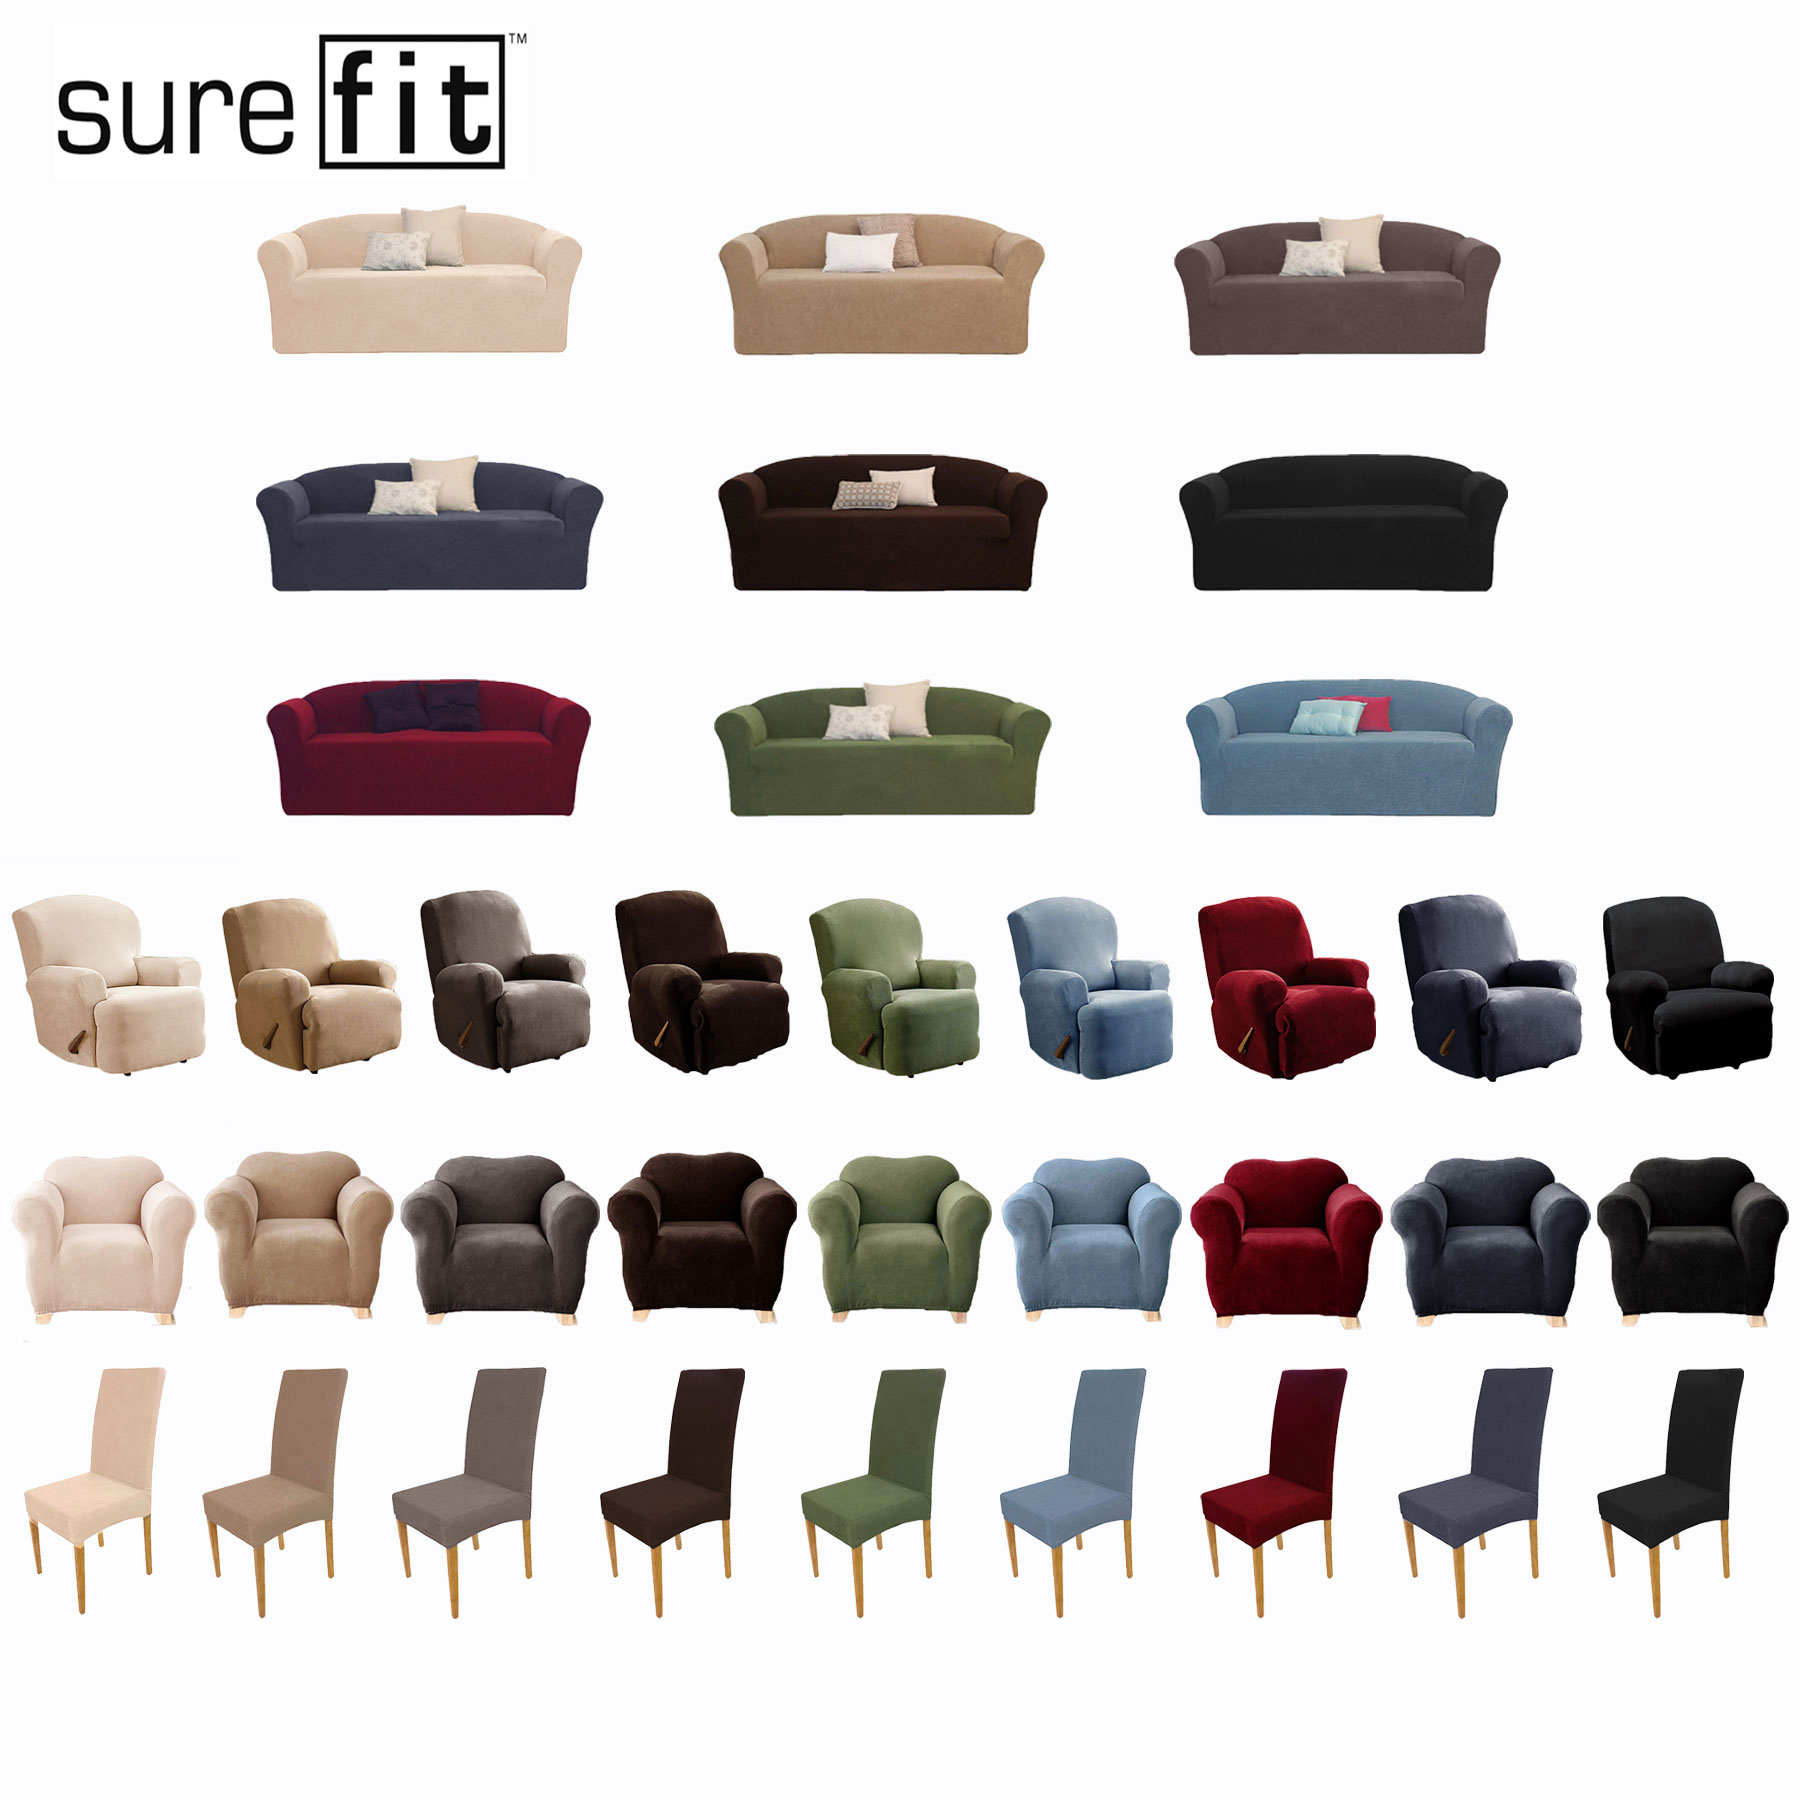 sure fit couch covers amazon